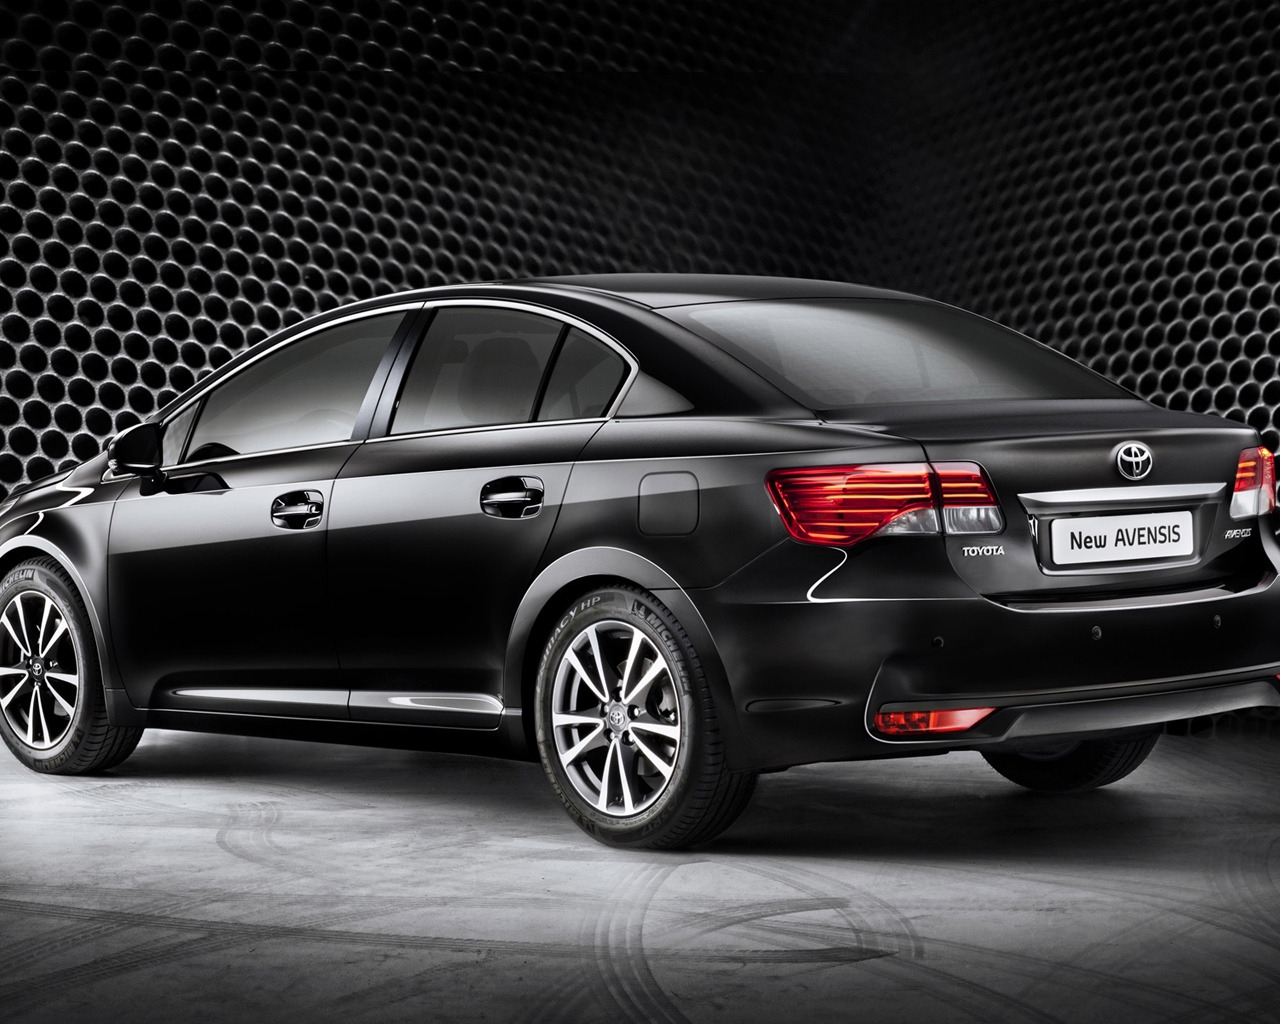 Toyota Avensis 2012 for 1280 x 1024 resolution